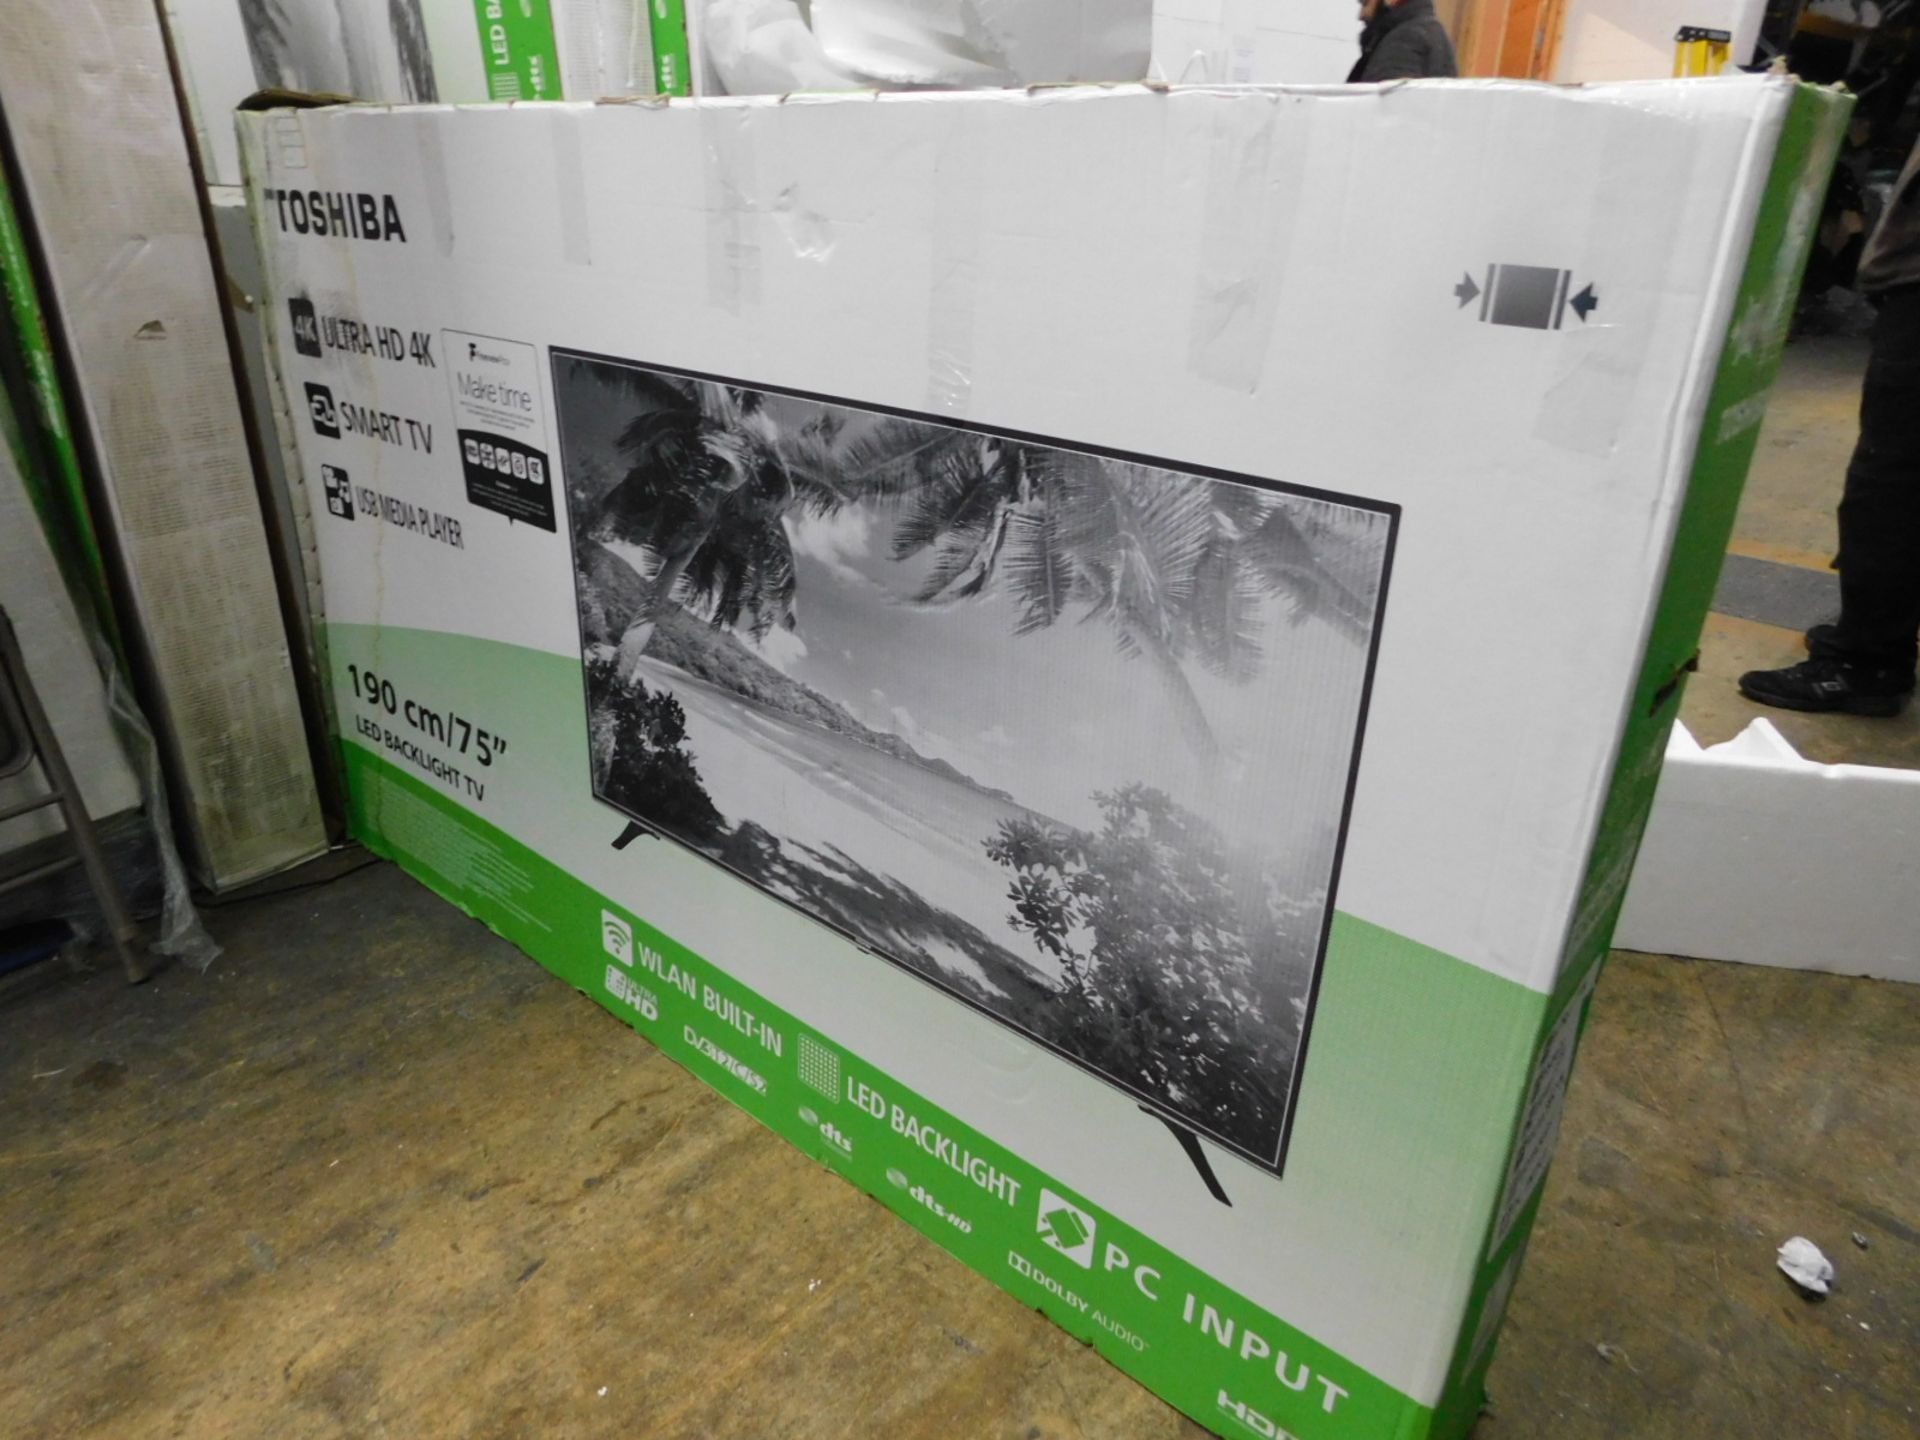 1 BOXED SMASHED SCREEN TOSHIBA 75U6763DB 75" 4K ULTRA HD SMART TV WITH REMOTE RRP Â£1199 (MAY HAVE